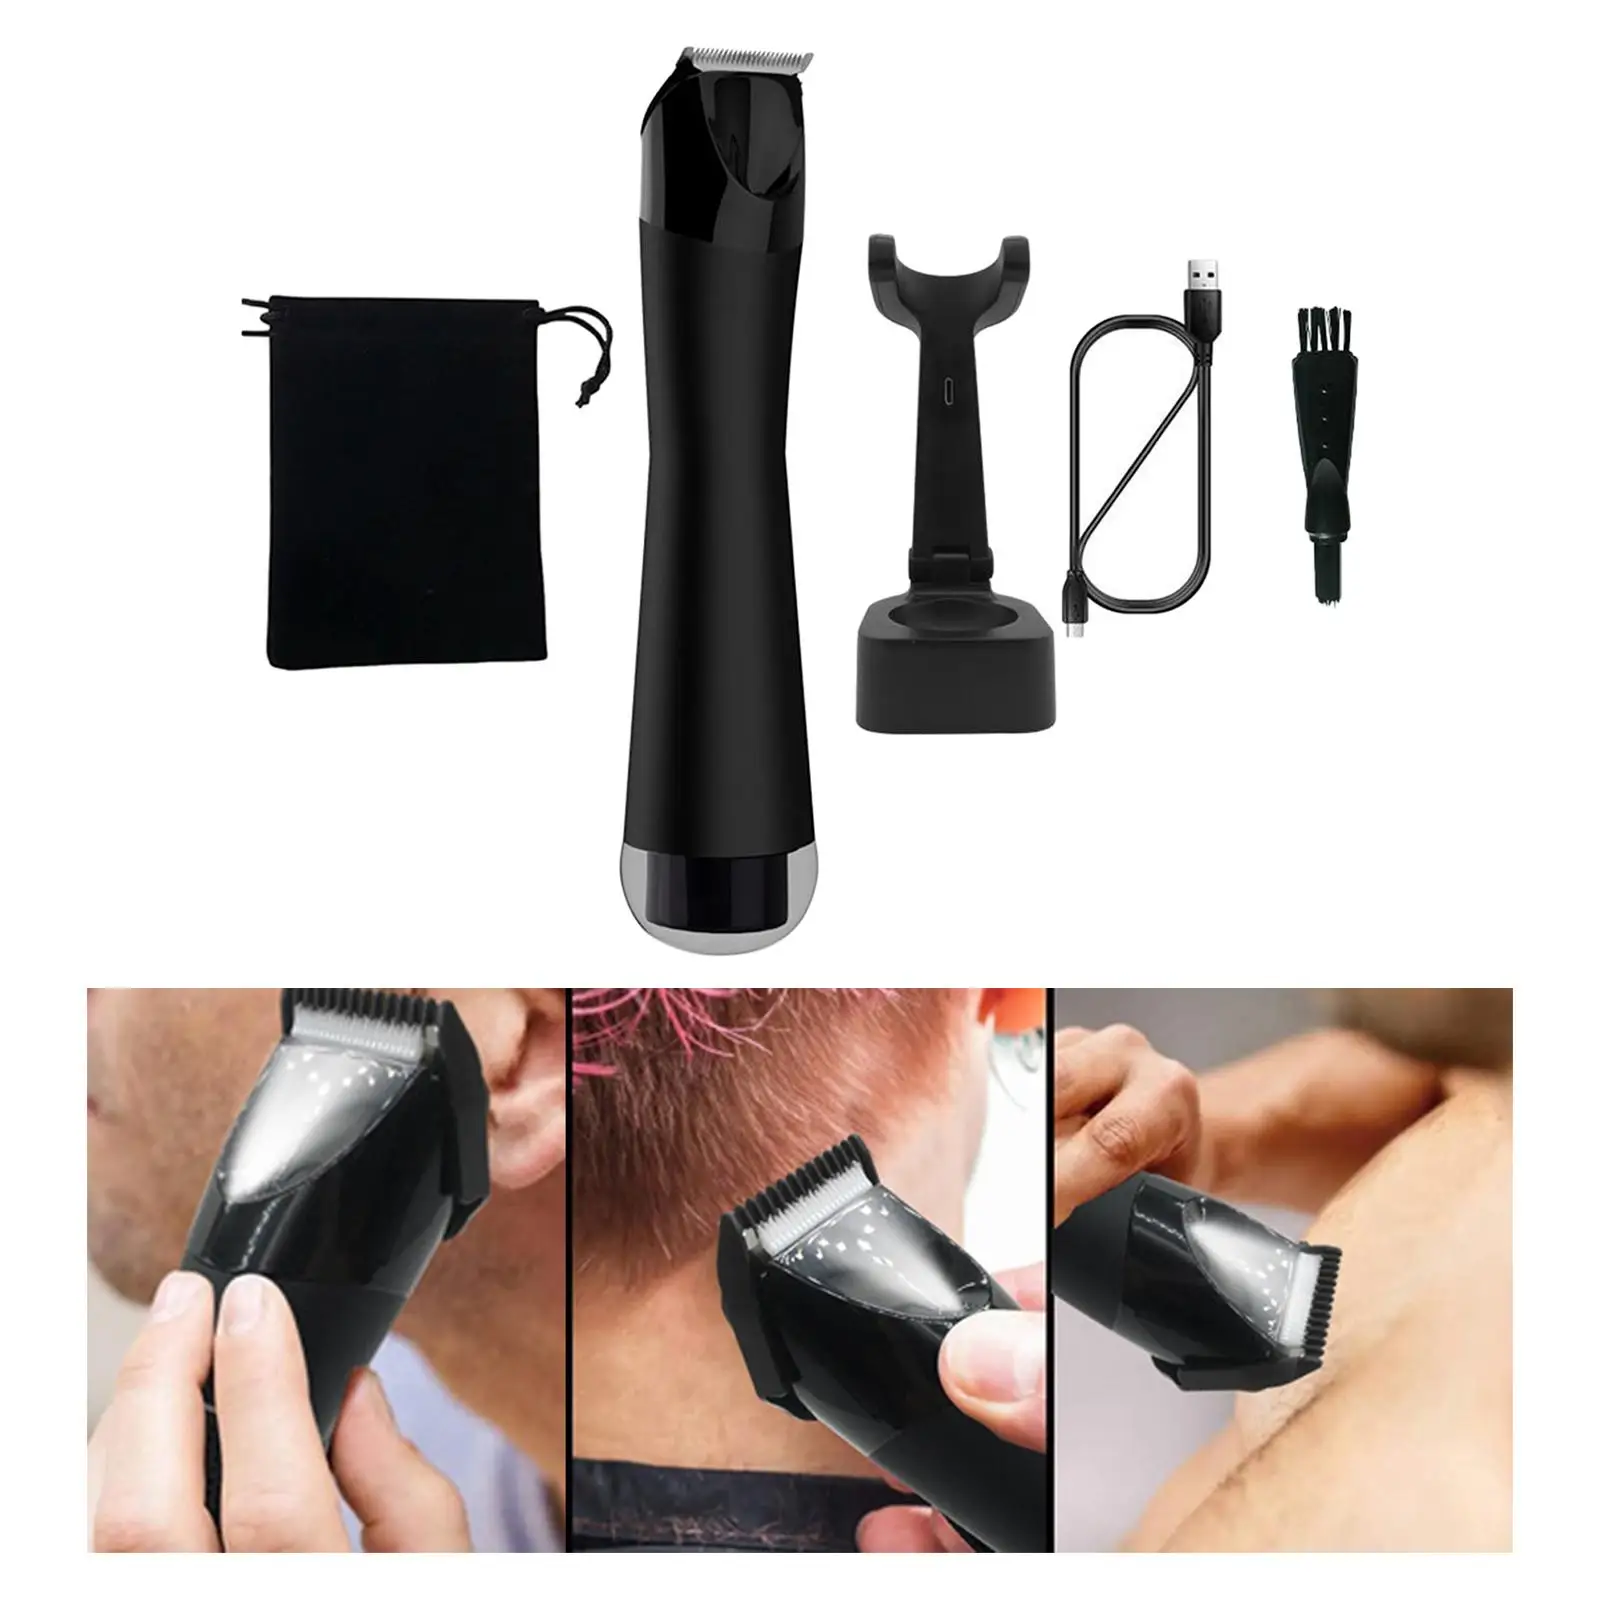 Double Head Electric Groin Hair Shaver for Men, USB Charging Detachable Professional